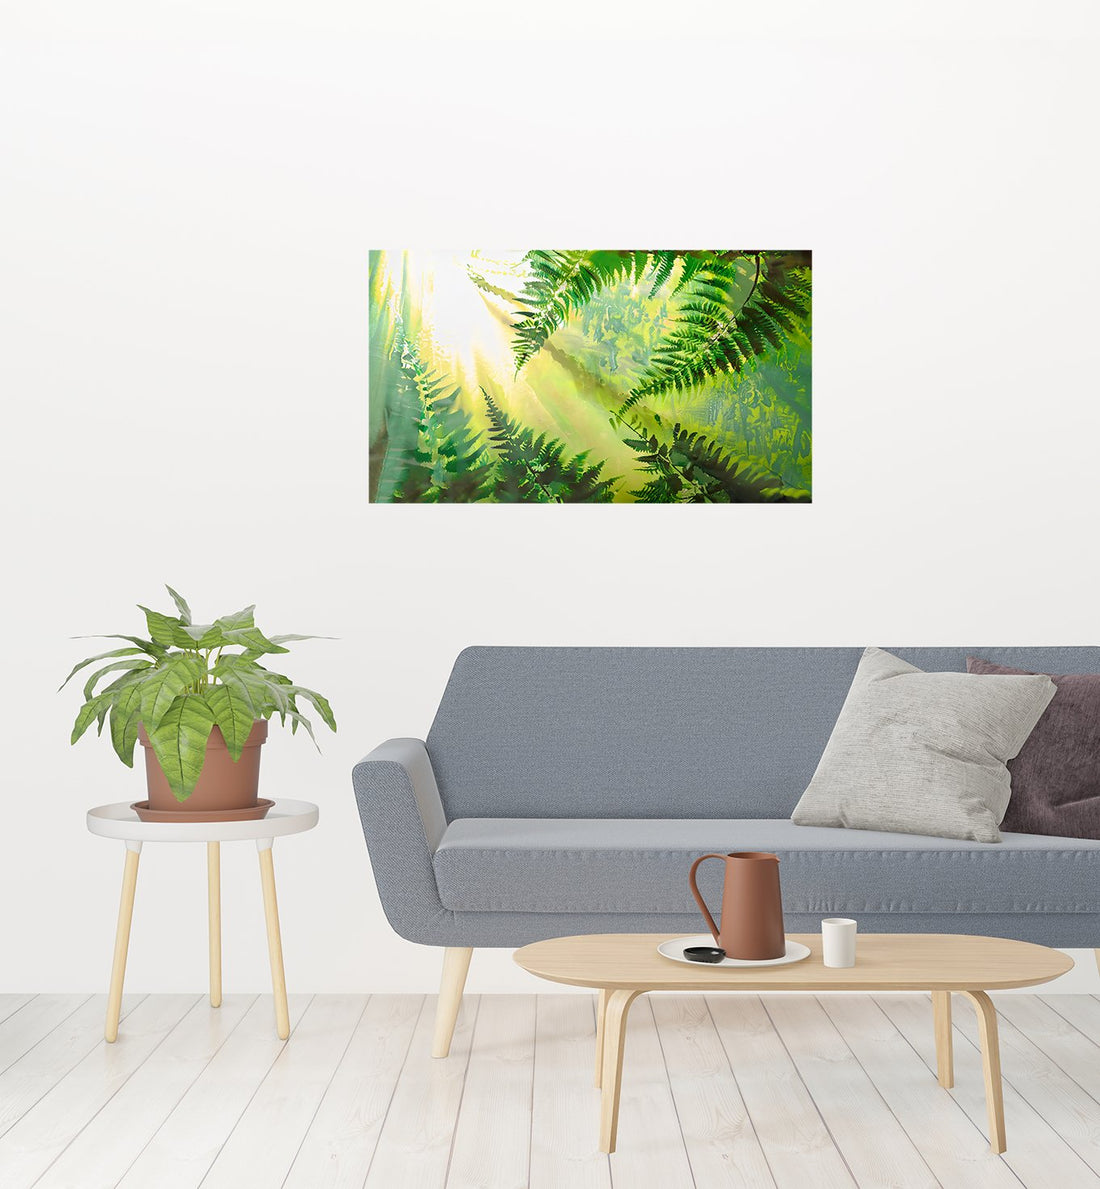 Bring nature into your room with a canvas print - Posterify